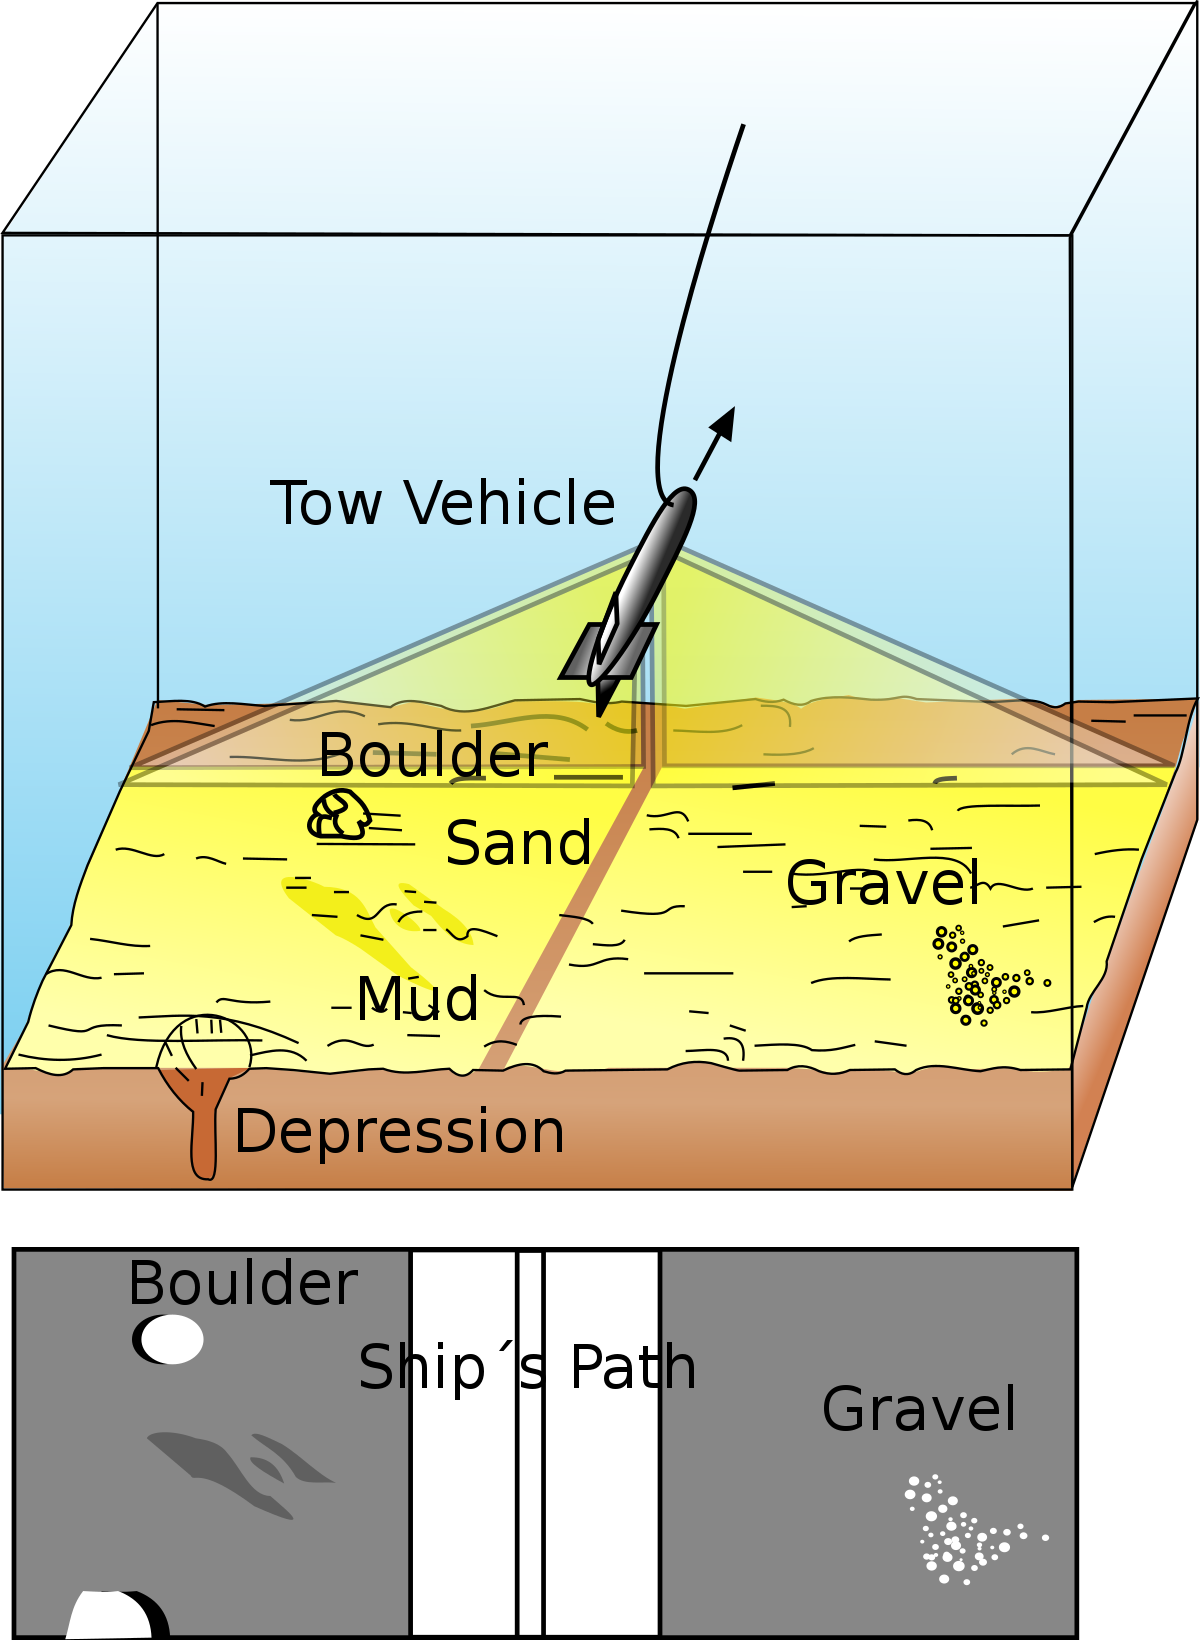 A diagram showing how side-scan sonar works